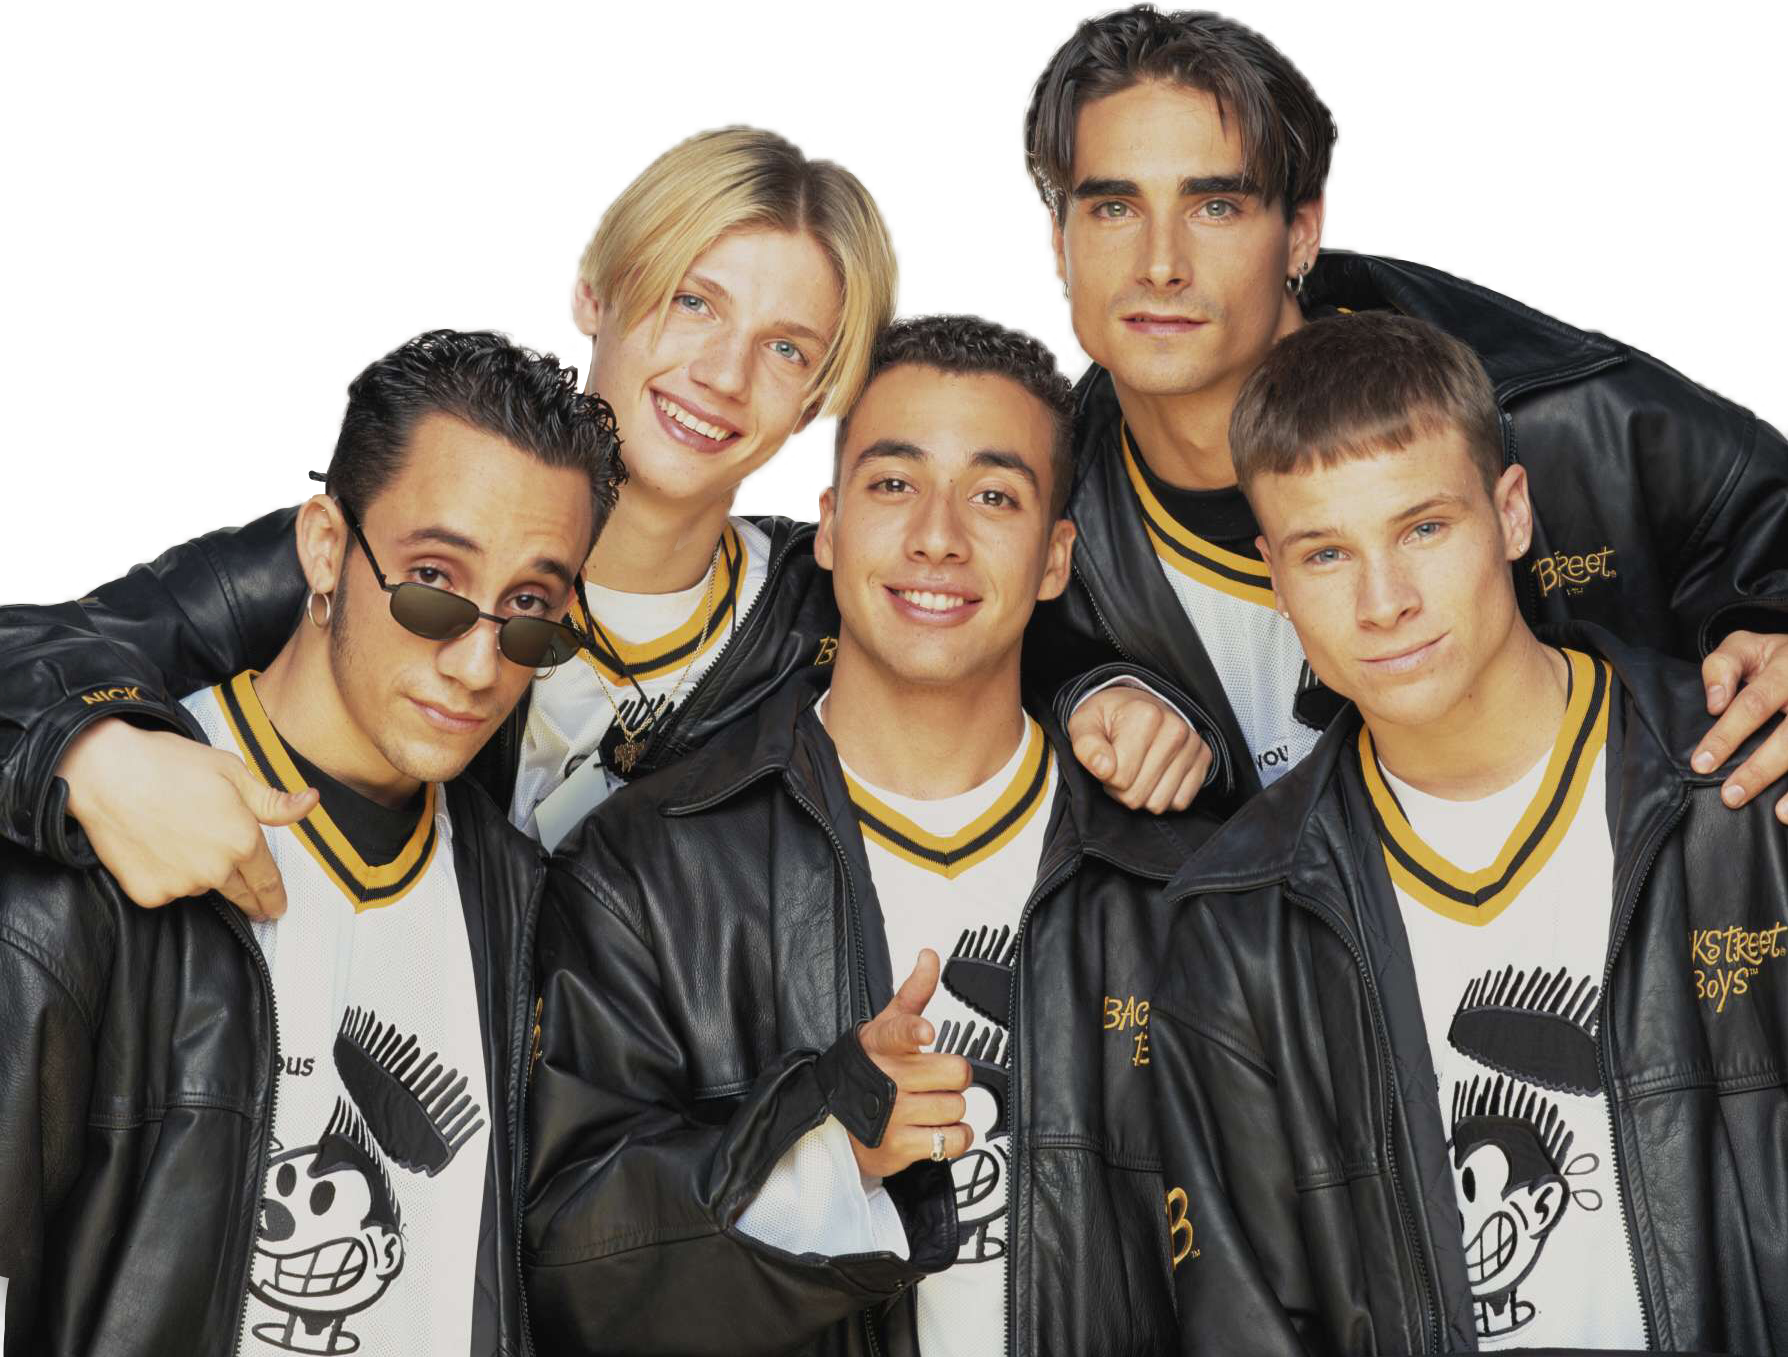 This visual is about bsb backstreetboys boyband nick kevin freetoedit #bsb ...